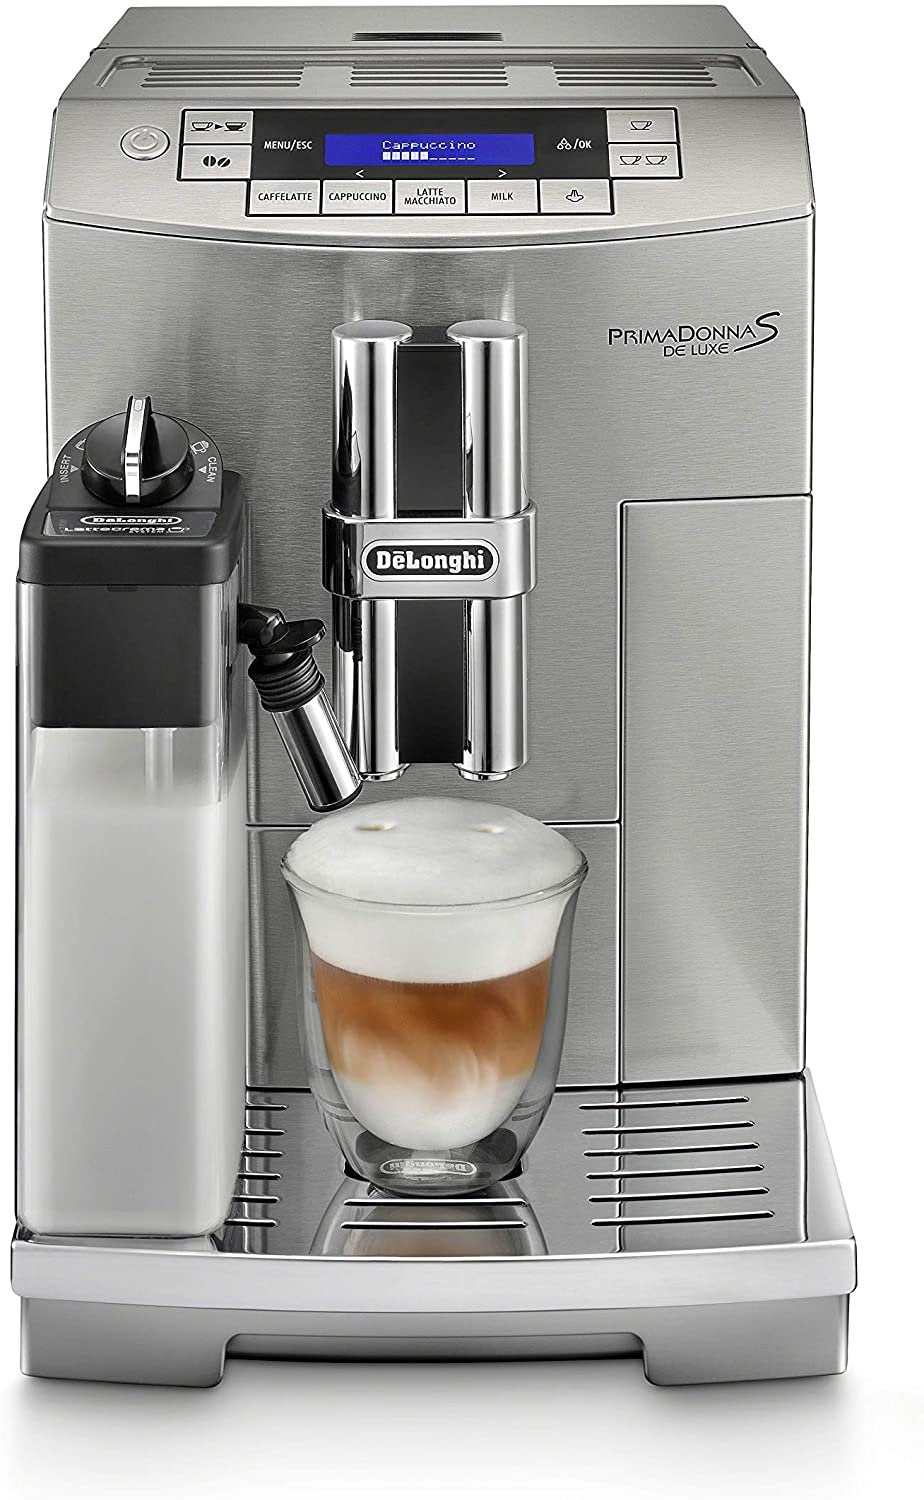 DeLonghi Prima Donna Fully Automatic Espresso Machine with Lattecrema System, Milk Frother and Memory function, Stainless Steel, ECAM28465